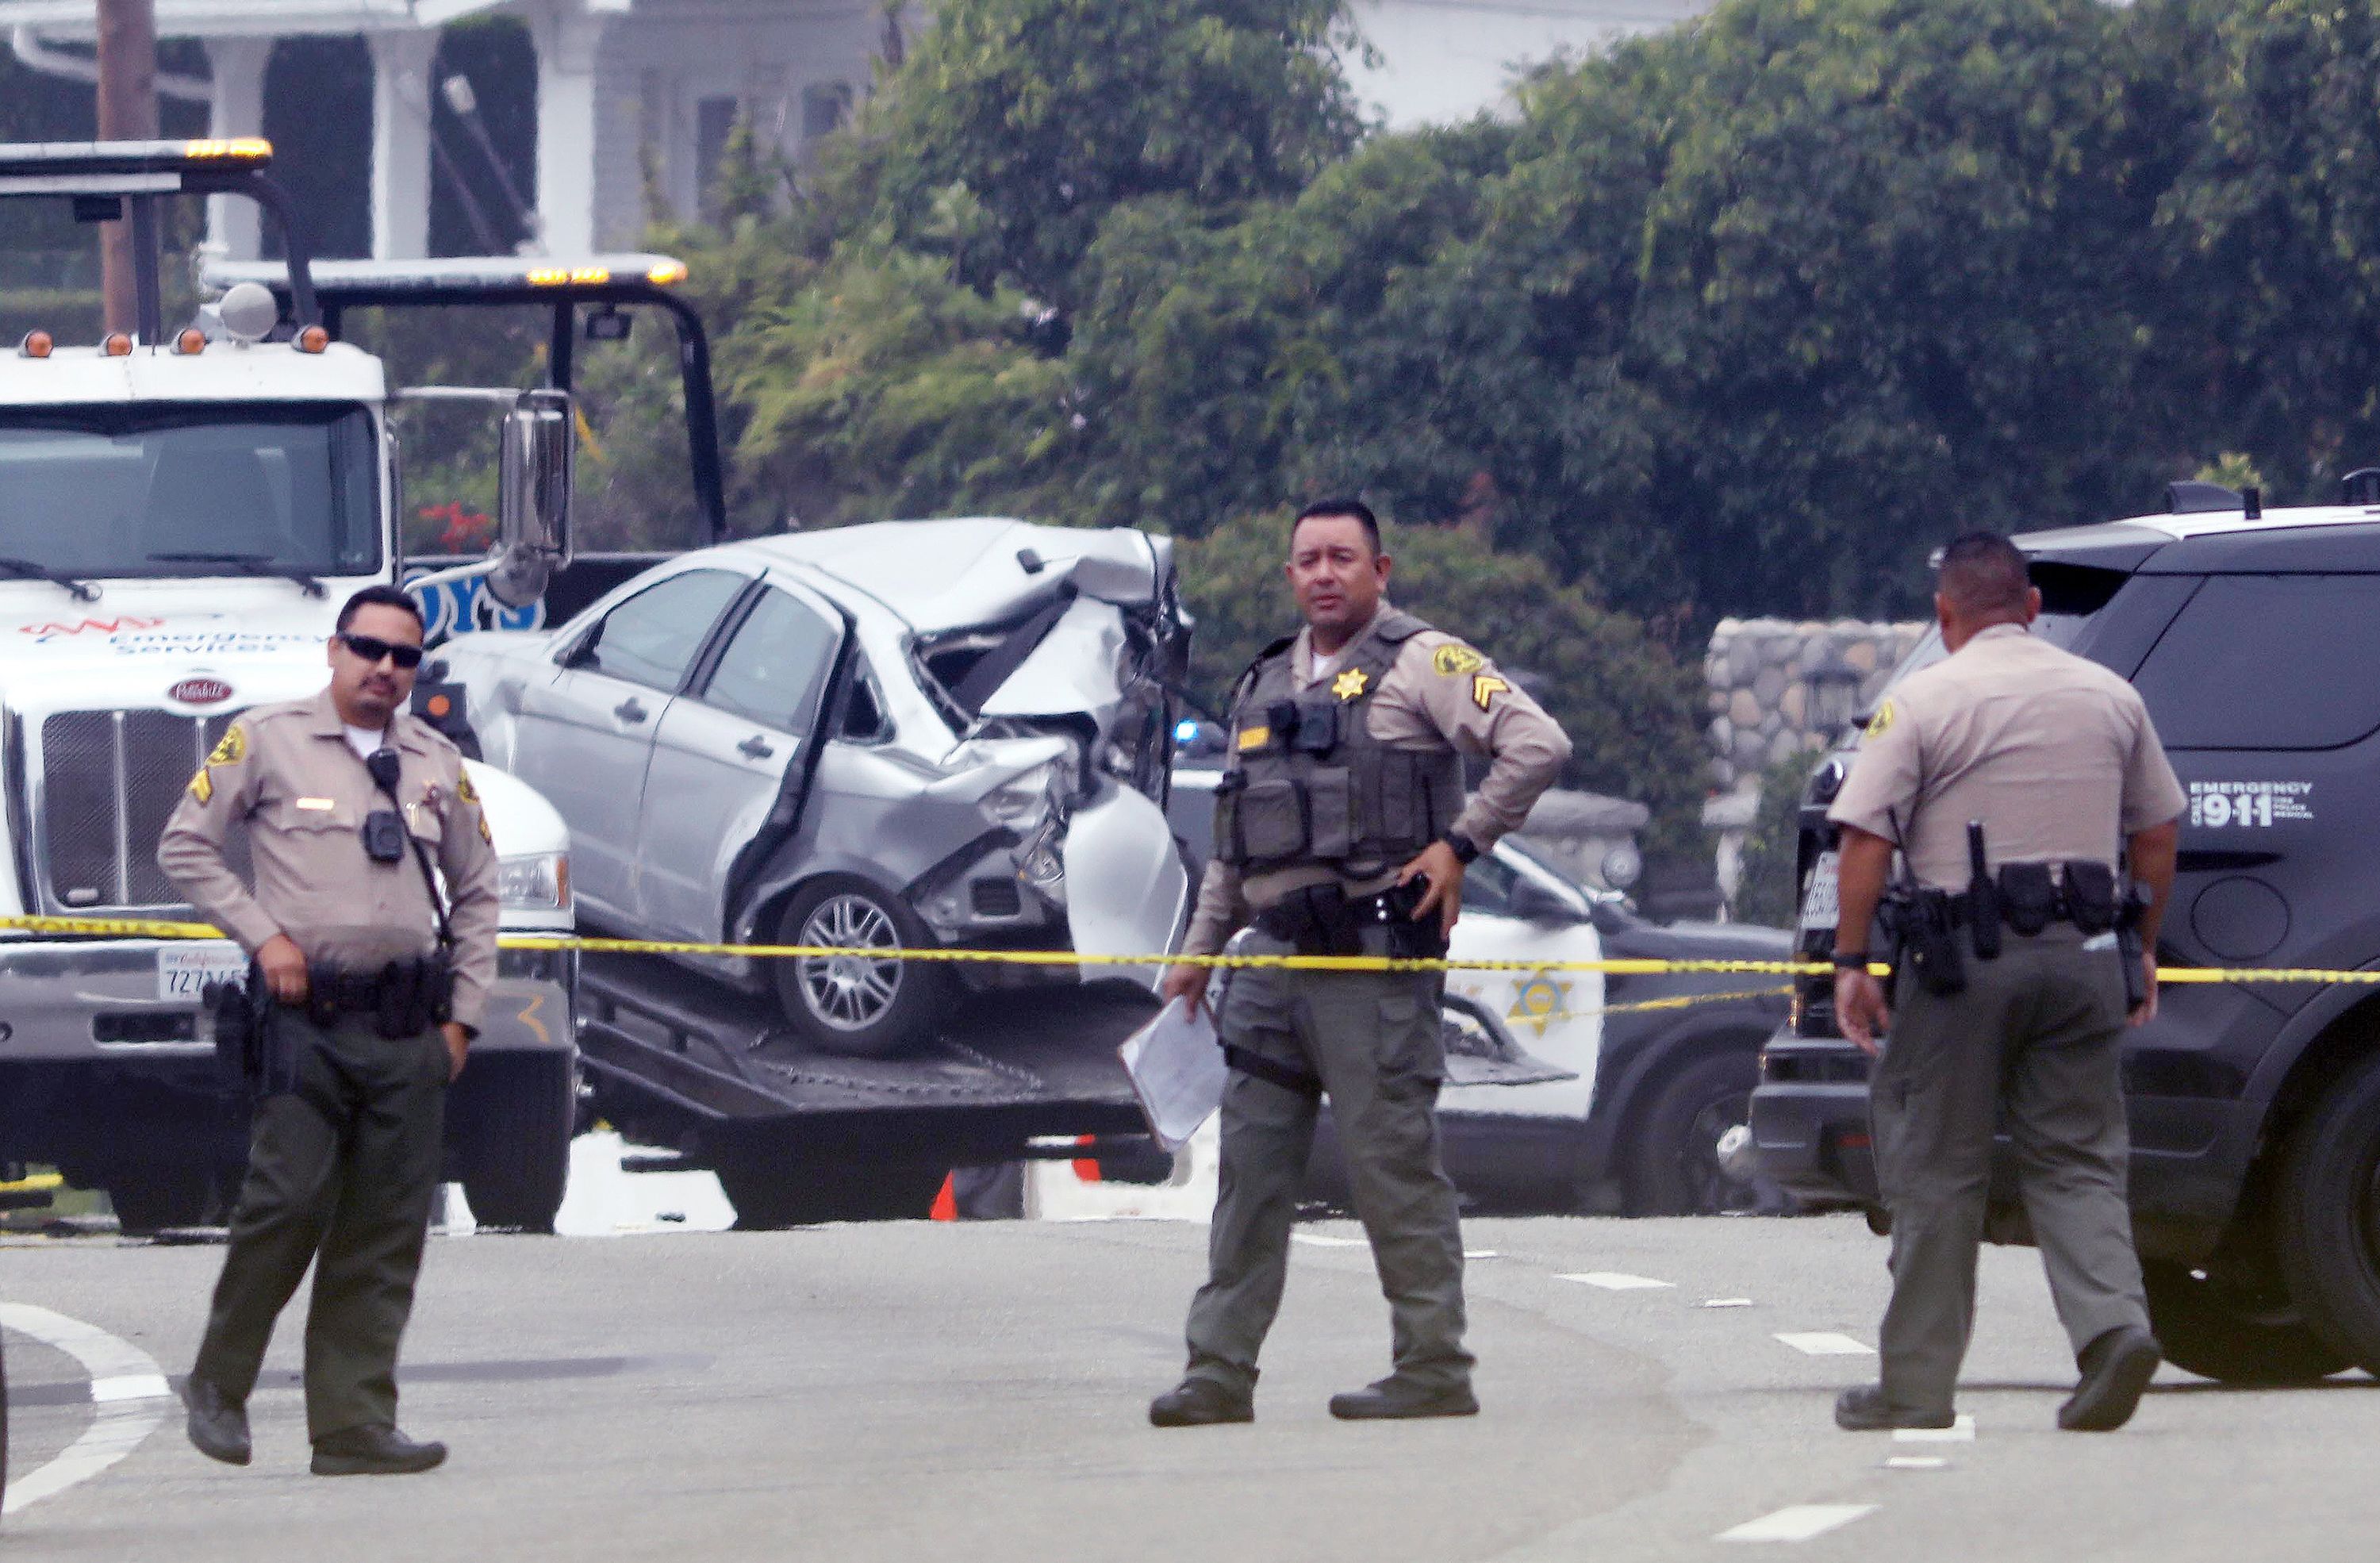 LOS ANGELES, CA - OCTOBER 18, 2023 - Sheriff deputies monitor the scene where four women were killed in a multi-vehicle crash in Malibu on October 18, 2023. A 22-year-old man was arrested after plowing into the pedestrians and parked cars. The crash was reported at 8:30 p.m. Tuesday in the 21600 block of Pacific Coast Highway where they found the victims of the crash, along with the severely damaged vehicles. The crash began when the suspect lost control of his BMW and slammed into multiple parked cars before ricocheting and fatally striking the women, who were standing on the side of the road. (Genaro Molina / Los Angeles Times via Getty Images)